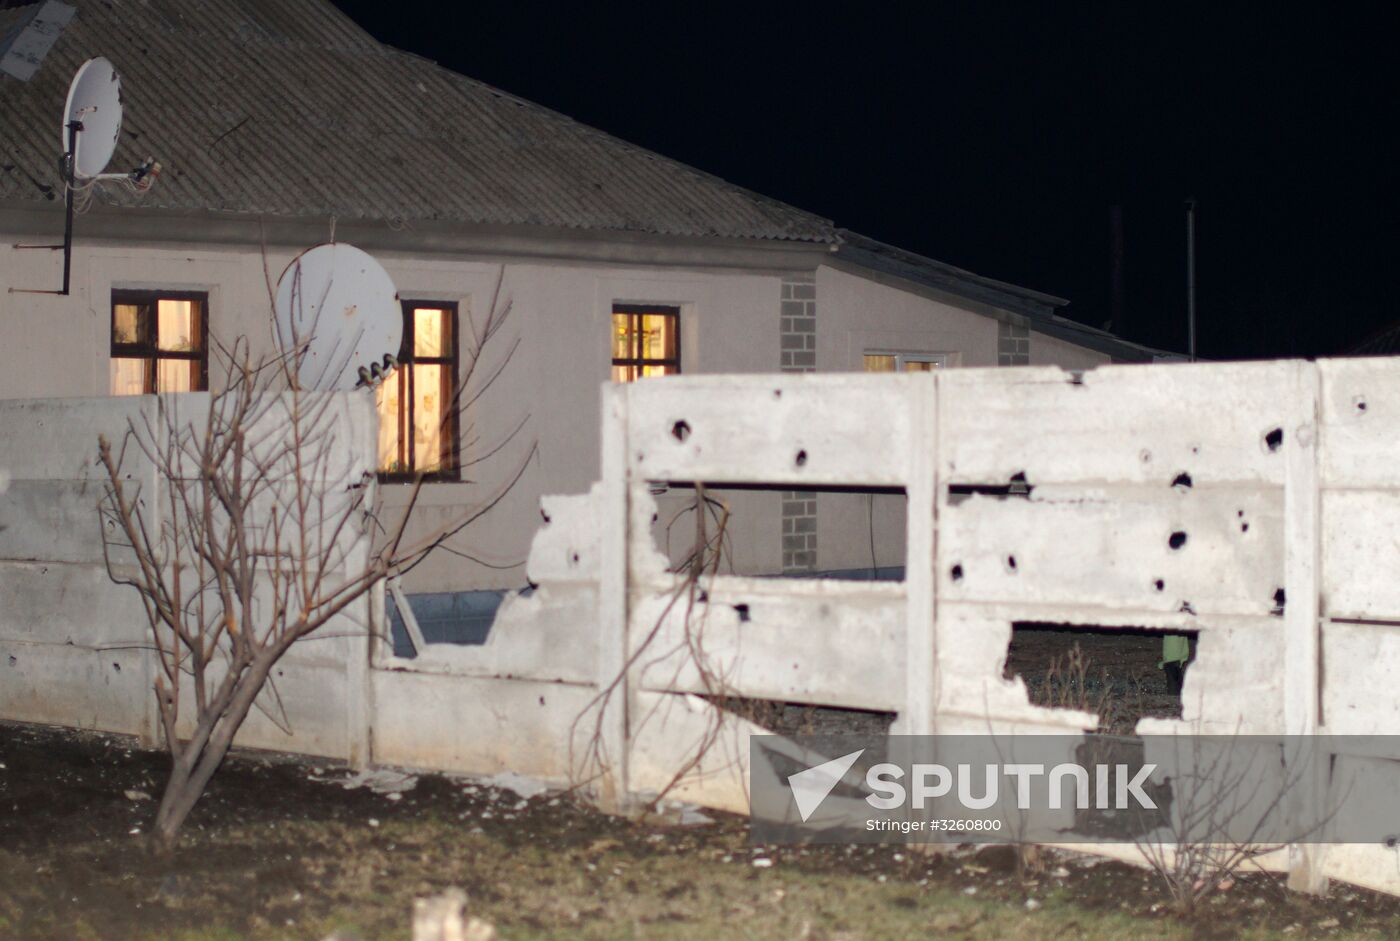 Aftermath of Stakhanov shelling in Donbass